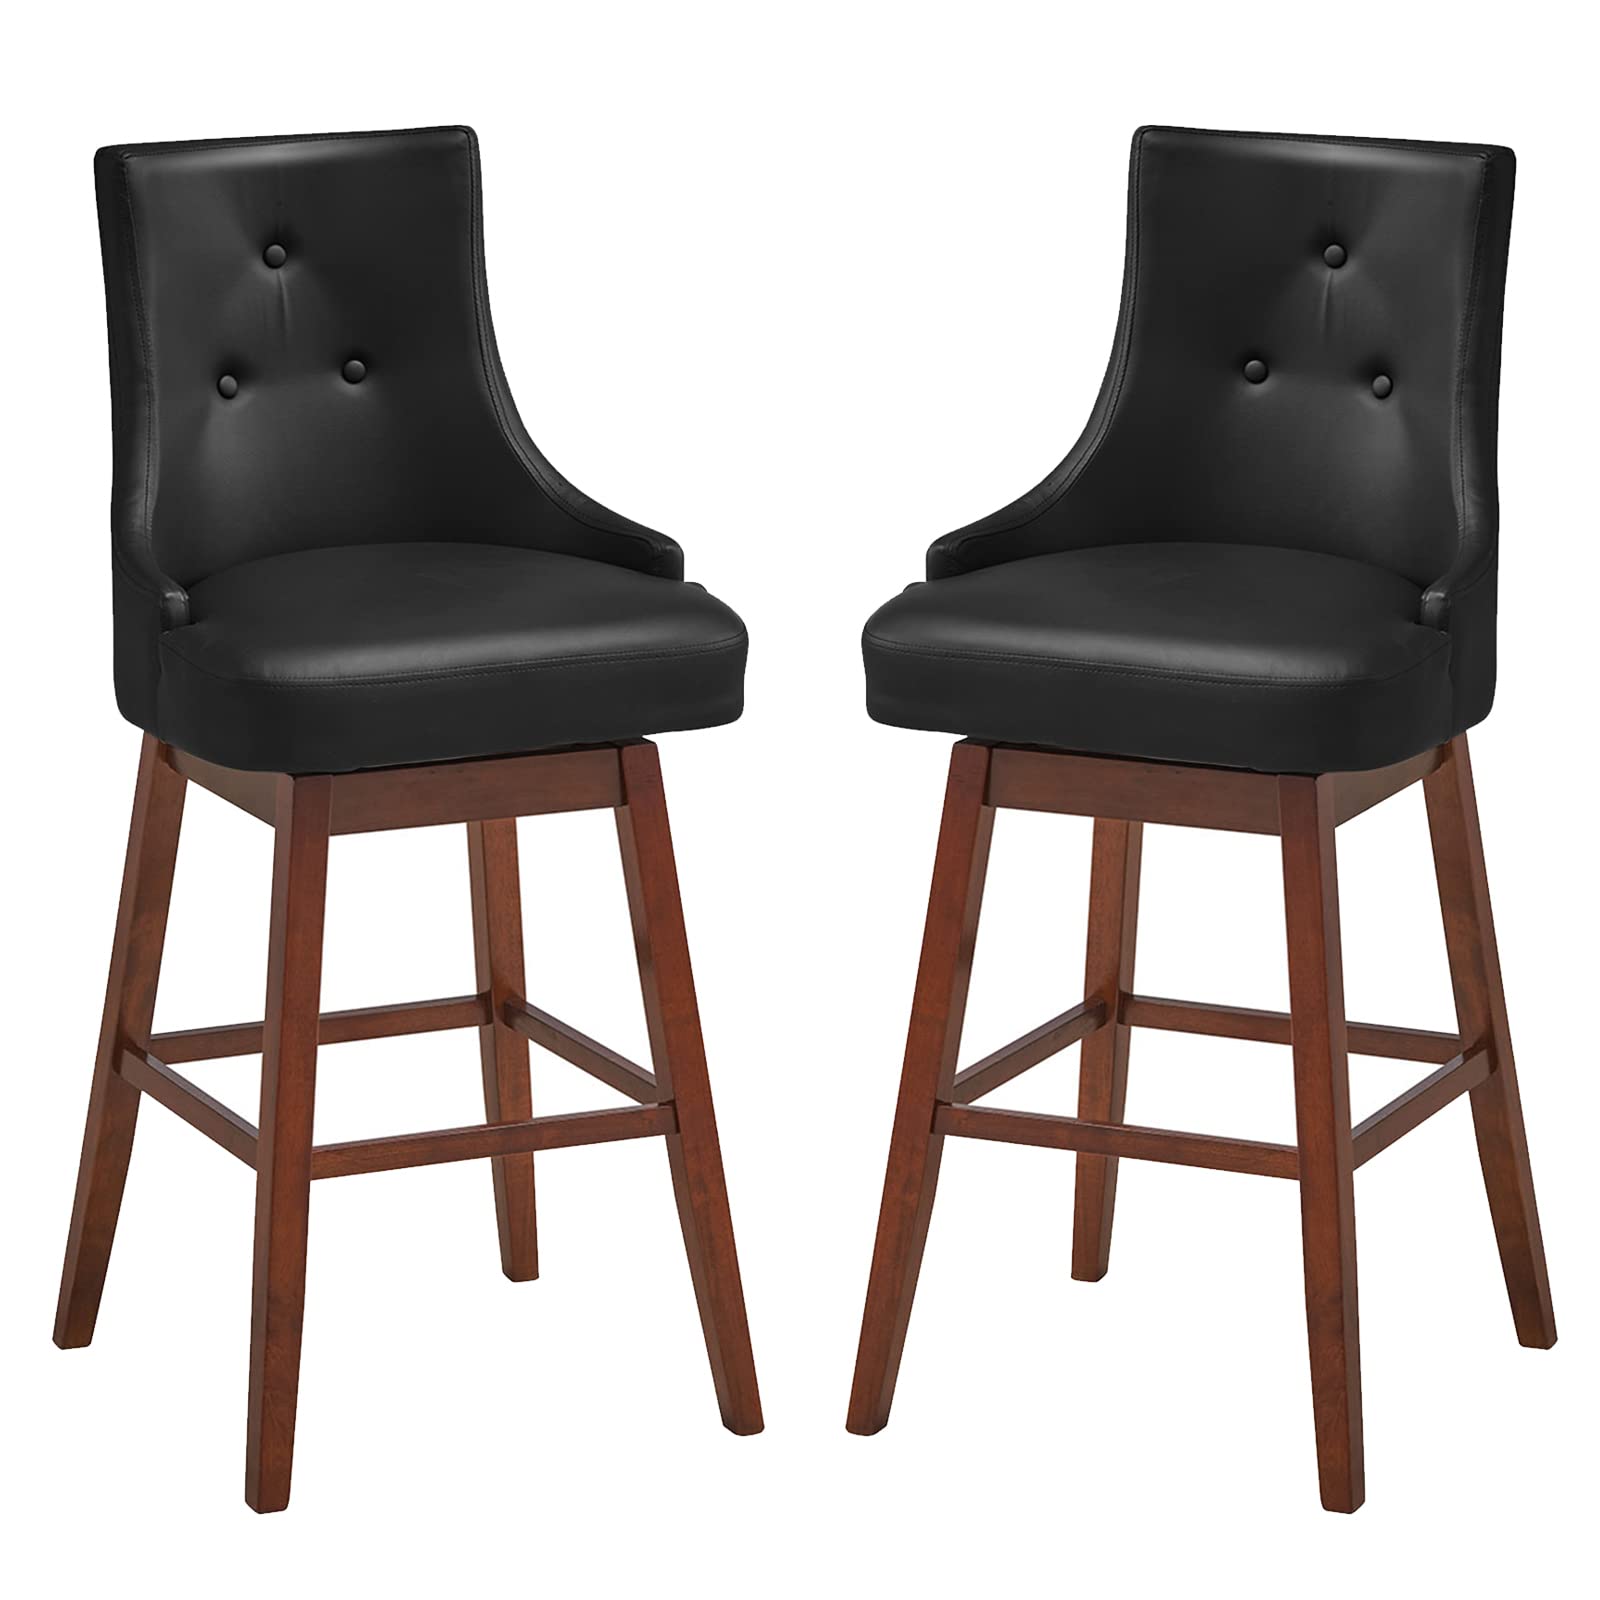 Giantex Swivel Bar Stools with Back Set of 2, 29" Counter Height Barstools with Foot Pads, Black